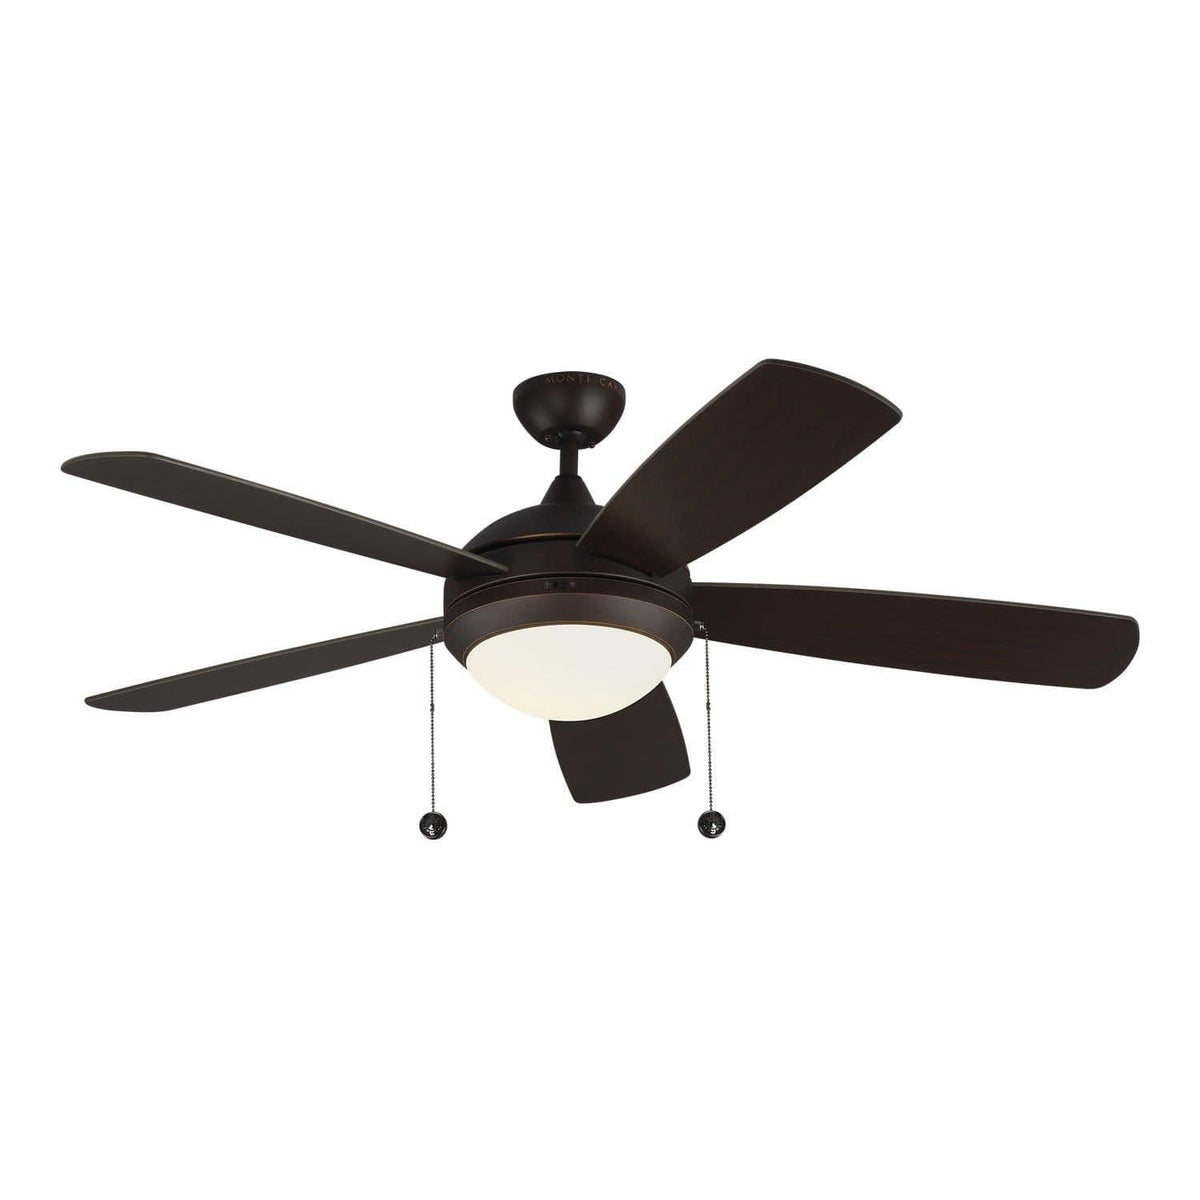 Visual Comfort Fan Collection - Discus Classic 52" Ceiling Fan - 5DIC52RBD-V1 | Montreal Lighting & Hardware